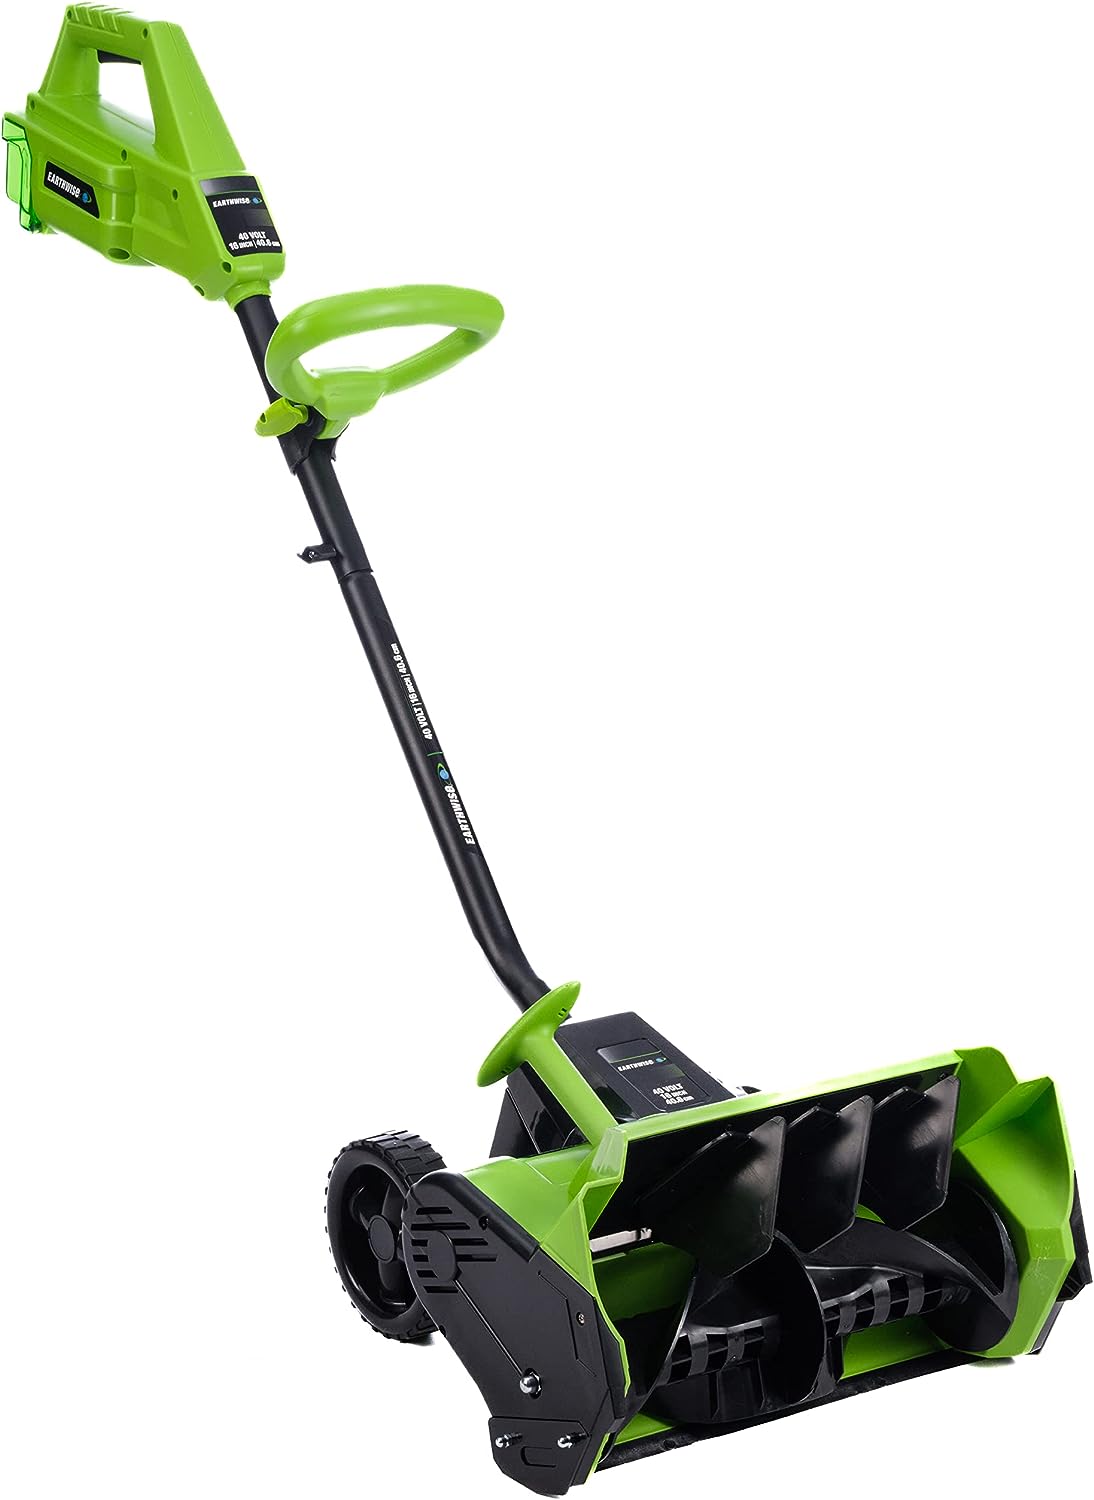 Earthwise SN74016 40-Volt Cordless Electric Snow [...]